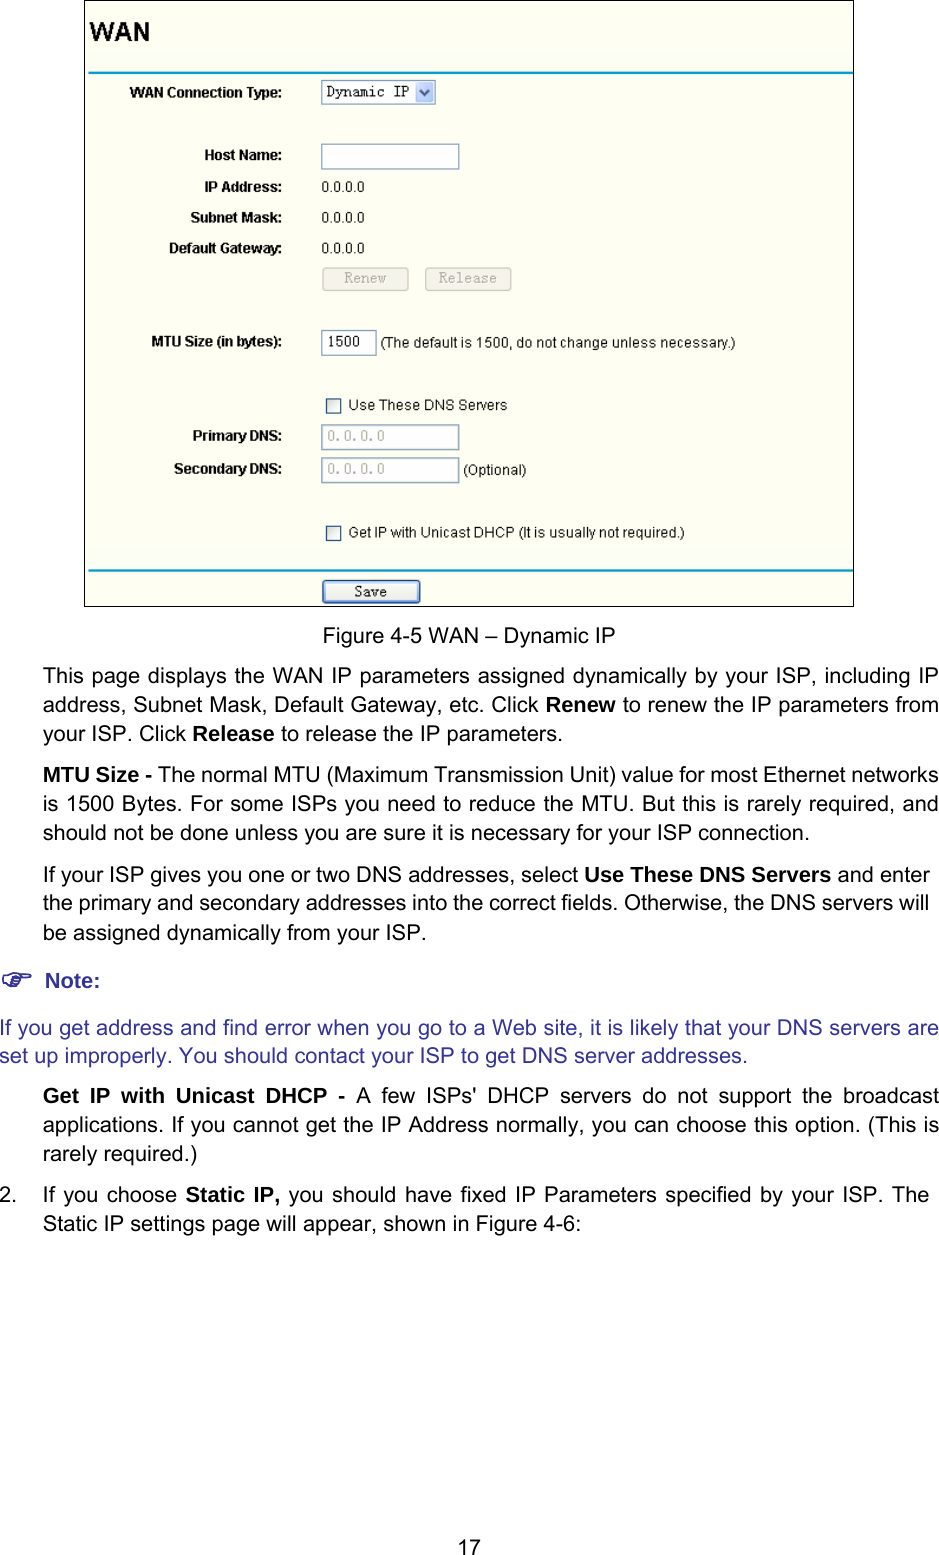  17  Figure 4-5 WAN – Dynamic IP This page displays the WAN IP parameters assigned dynamically by your ISP, including IP address, Subnet Mask, Default Gateway, etc. Click Renew to renew the IP parameters from your ISP. Click Release to release the IP parameters. MTU Size - The normal MTU (Maximum Transmission Unit) value for most Ethernet networks is 1500 Bytes. For some ISPs you need to reduce the MTU. But this is rarely required, and should not be done unless you are sure it is necessary for your ISP connection. If your ISP gives you one or two DNS addresses, select Use These DNS Servers and enter the primary and secondary addresses into the correct fields. Otherwise, the DNS servers will be assigned dynamically from your ISP.  ) Note: If you get address and find error when you go to a Web site, it is likely that your DNS servers are set up improperly. You should contact your ISP to get DNS server addresses.   Get IP with Unicast DHCP - A few ISPs&apos; DHCP servers do not support the broadcast applications. If you cannot get the IP Address normally, you can choose this option. (This is rarely required.) 2.  If you choose Static IP, you should have fixed IP Parameters specified by your ISP. The Static IP settings page will appear, shown in Figure 4-6: 